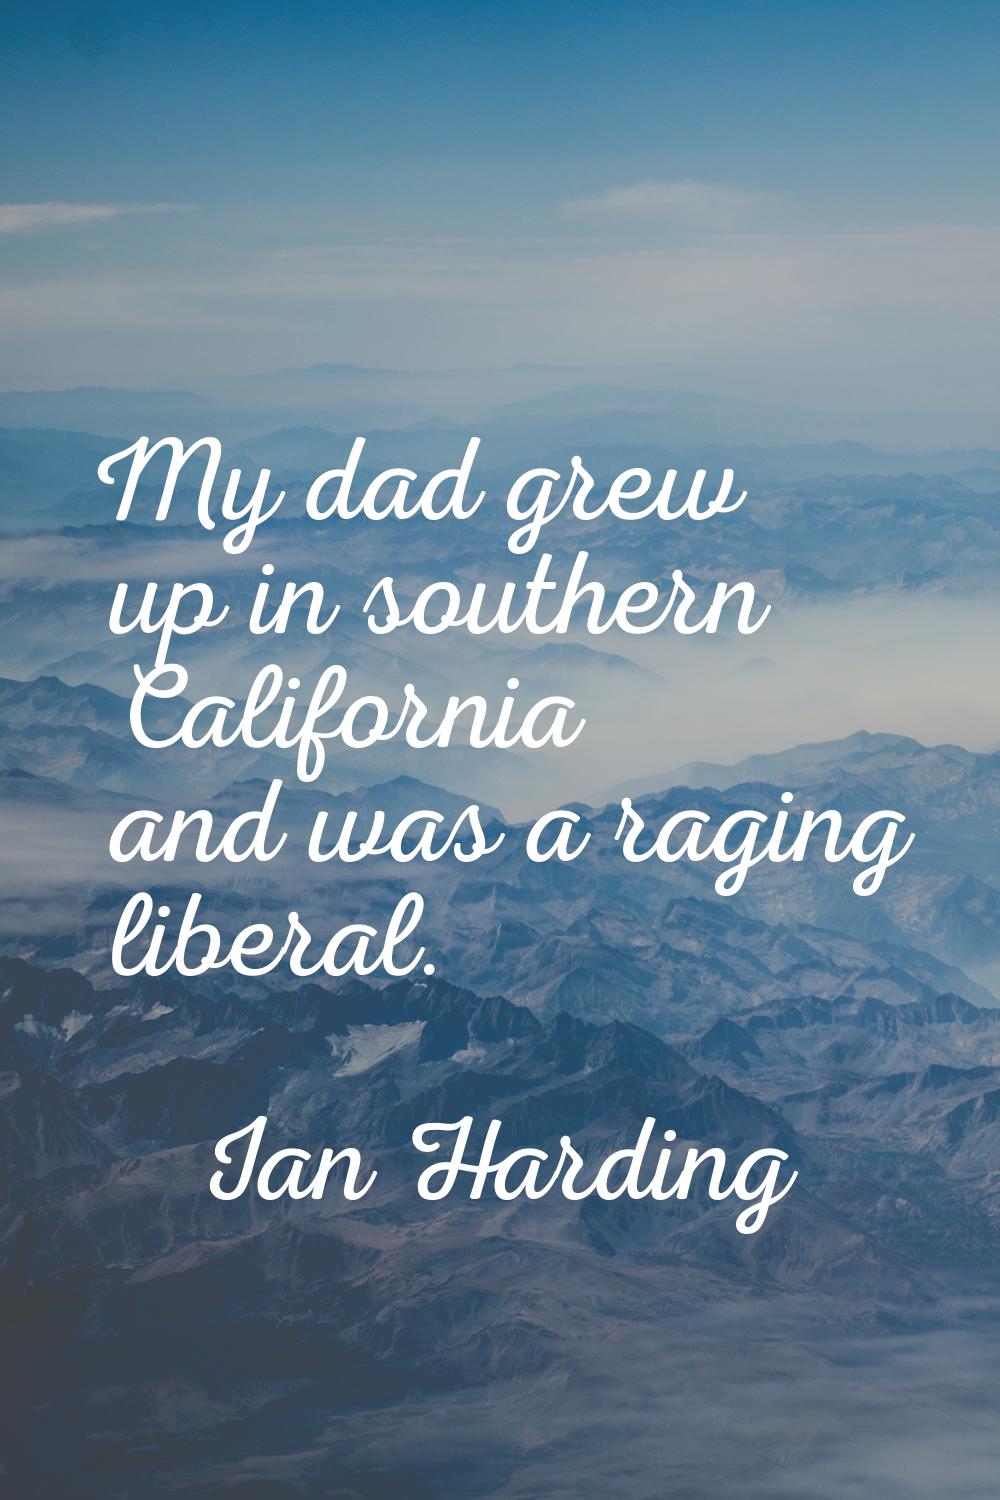 My dad grew up in southern California and was a raging liberal.